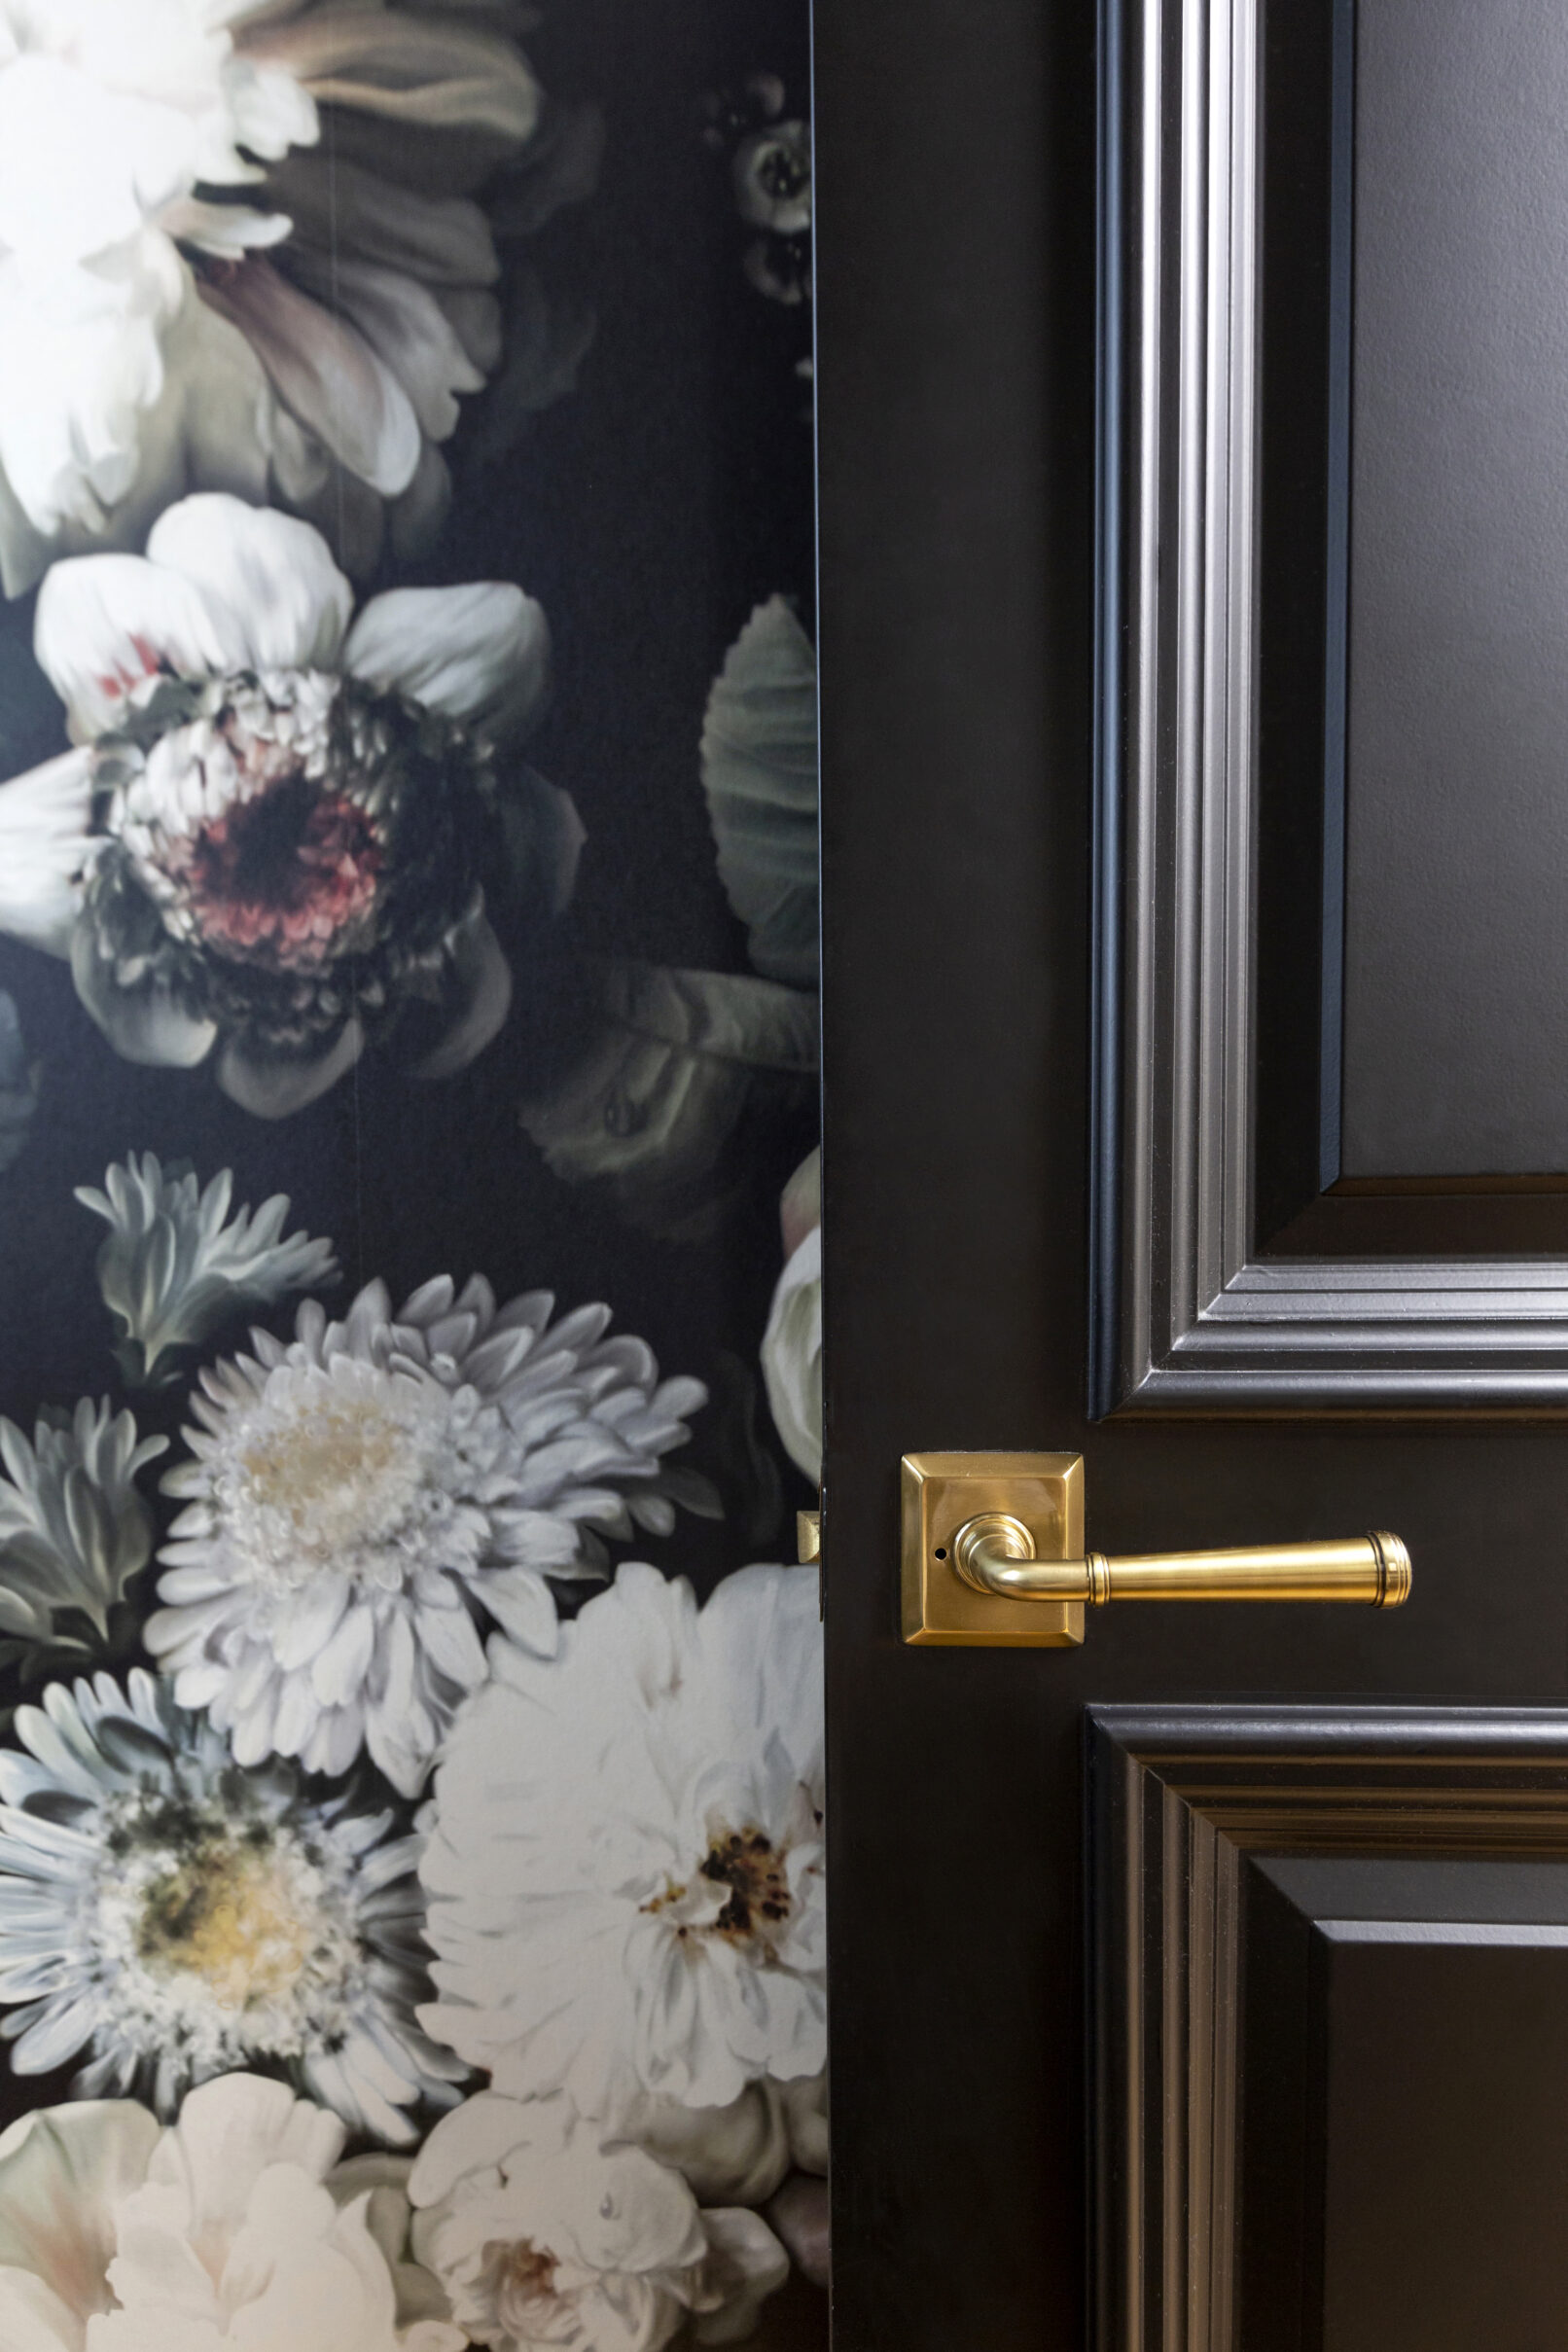 Detail photo of a black door with a gold handle in front of floral wallpaper.